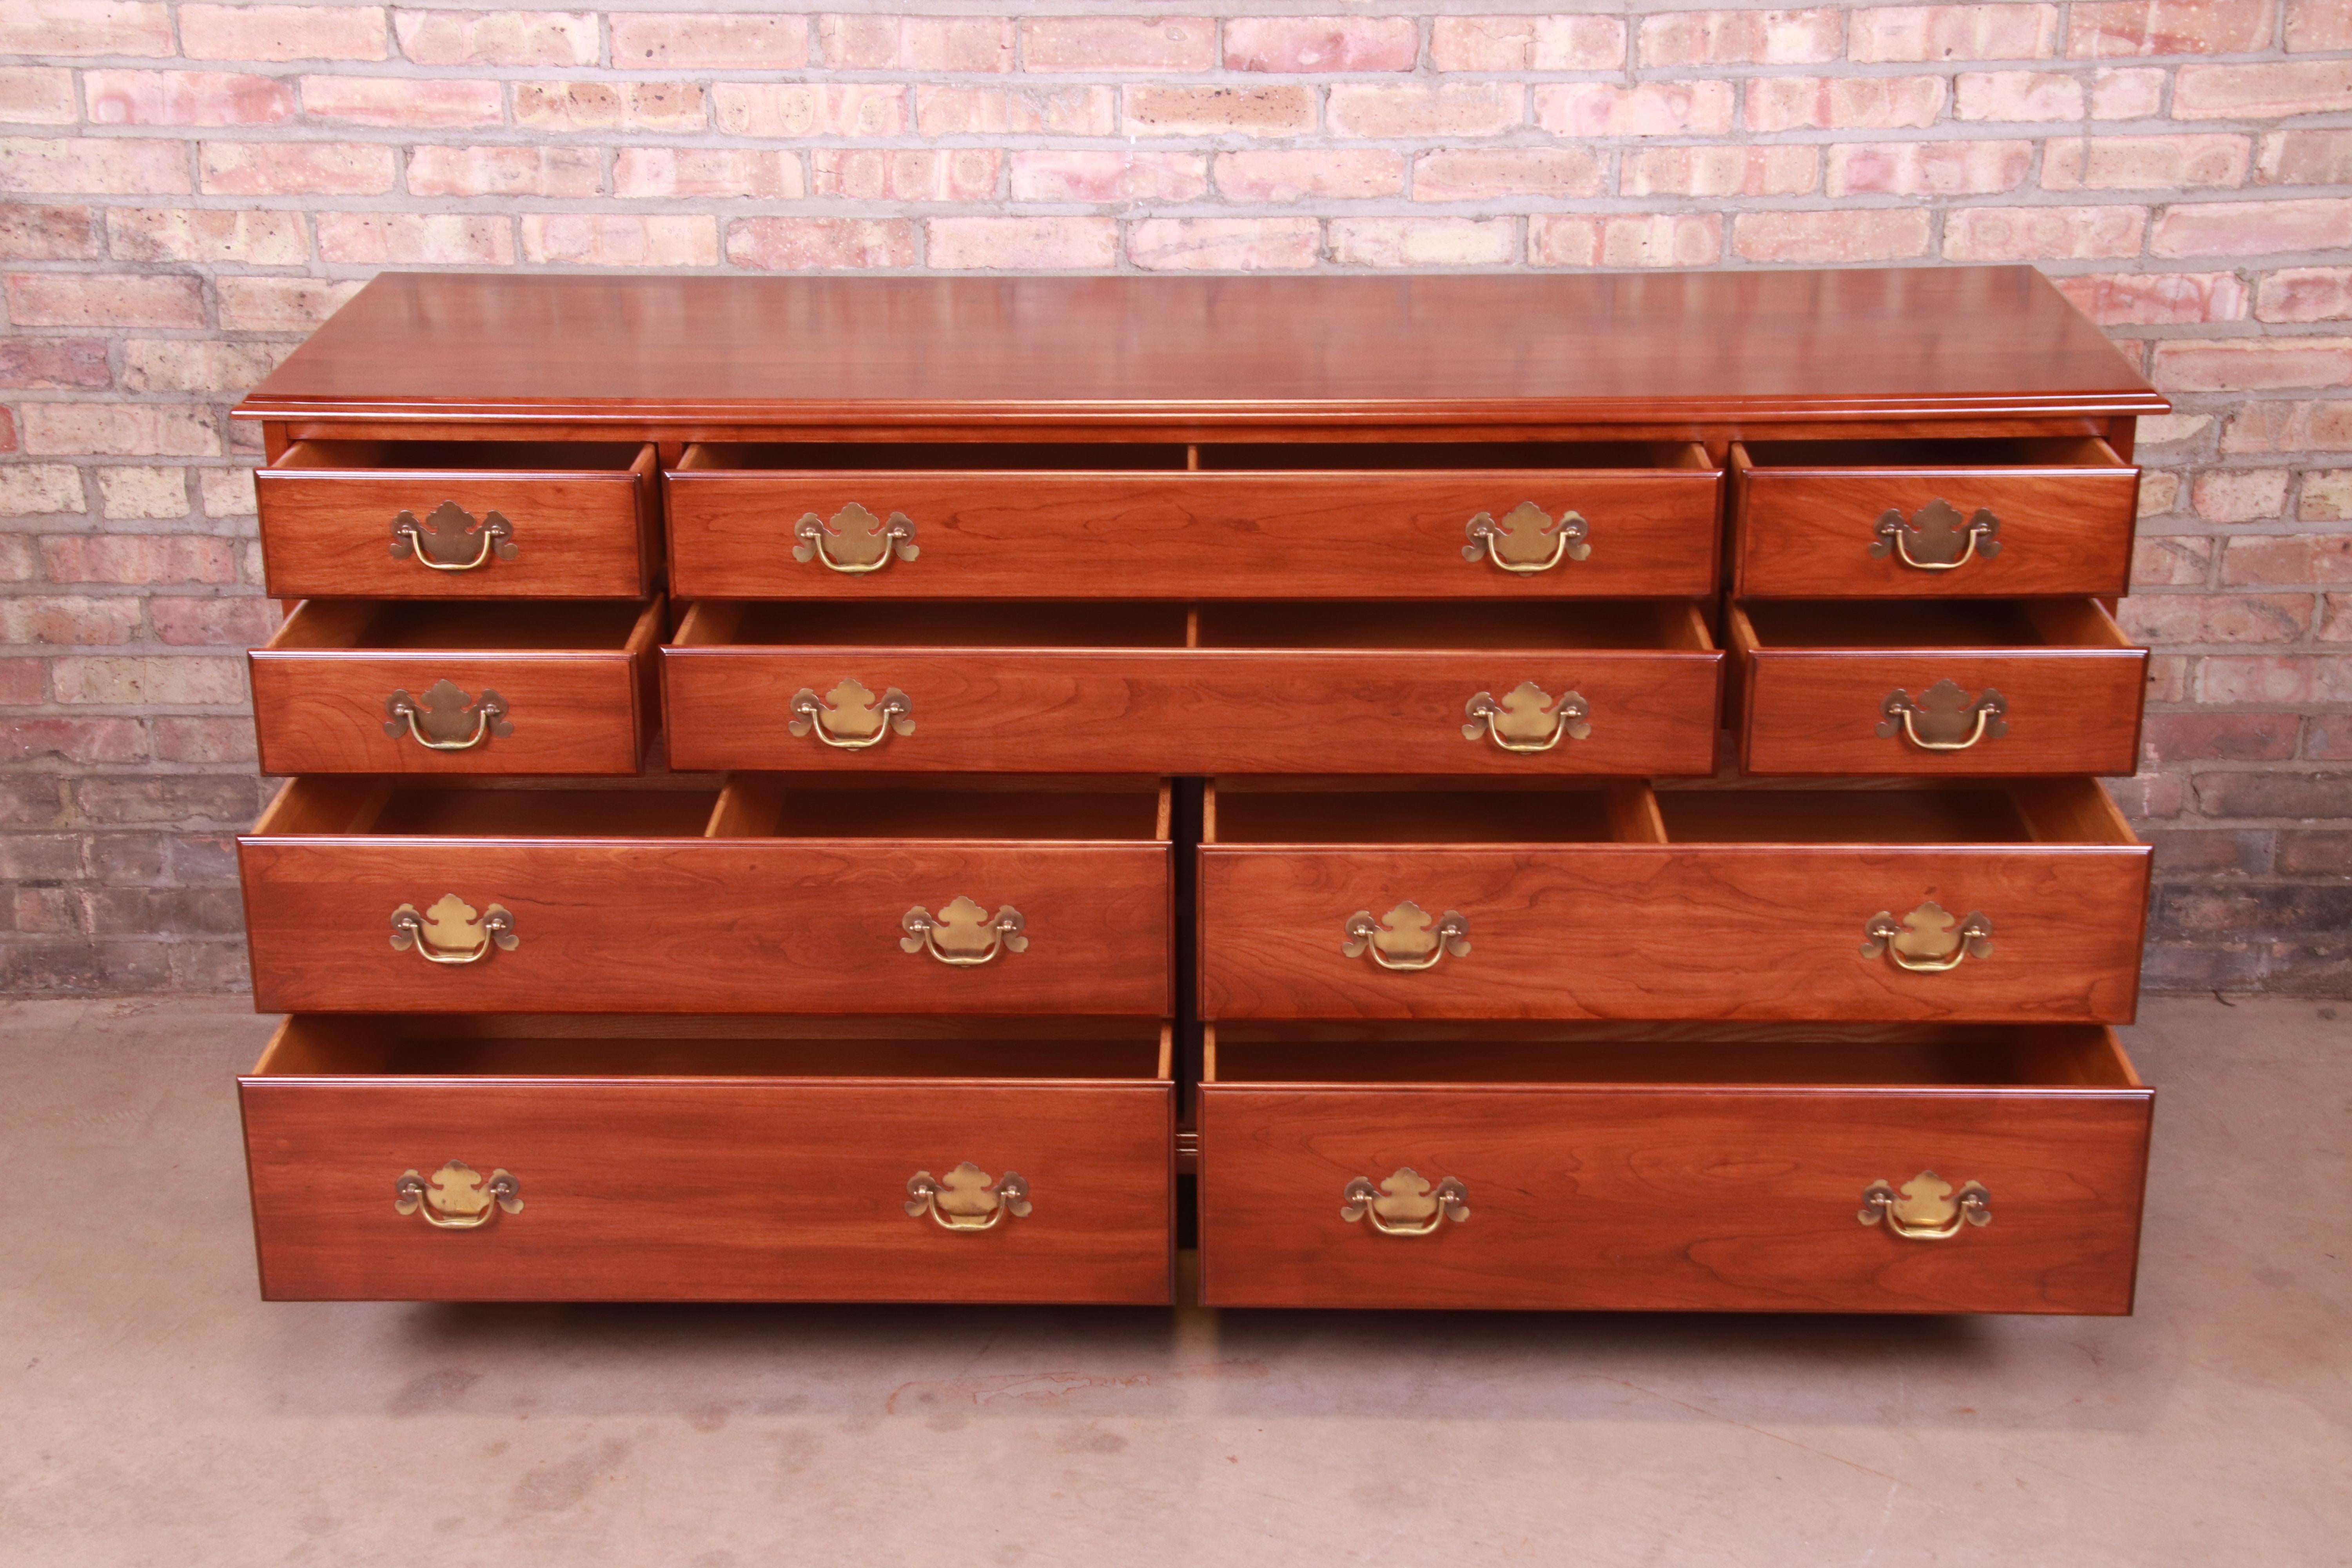 20th Century Henkel Harris American Chippendale Solid Cherrywood Dresser, Newly Refinished